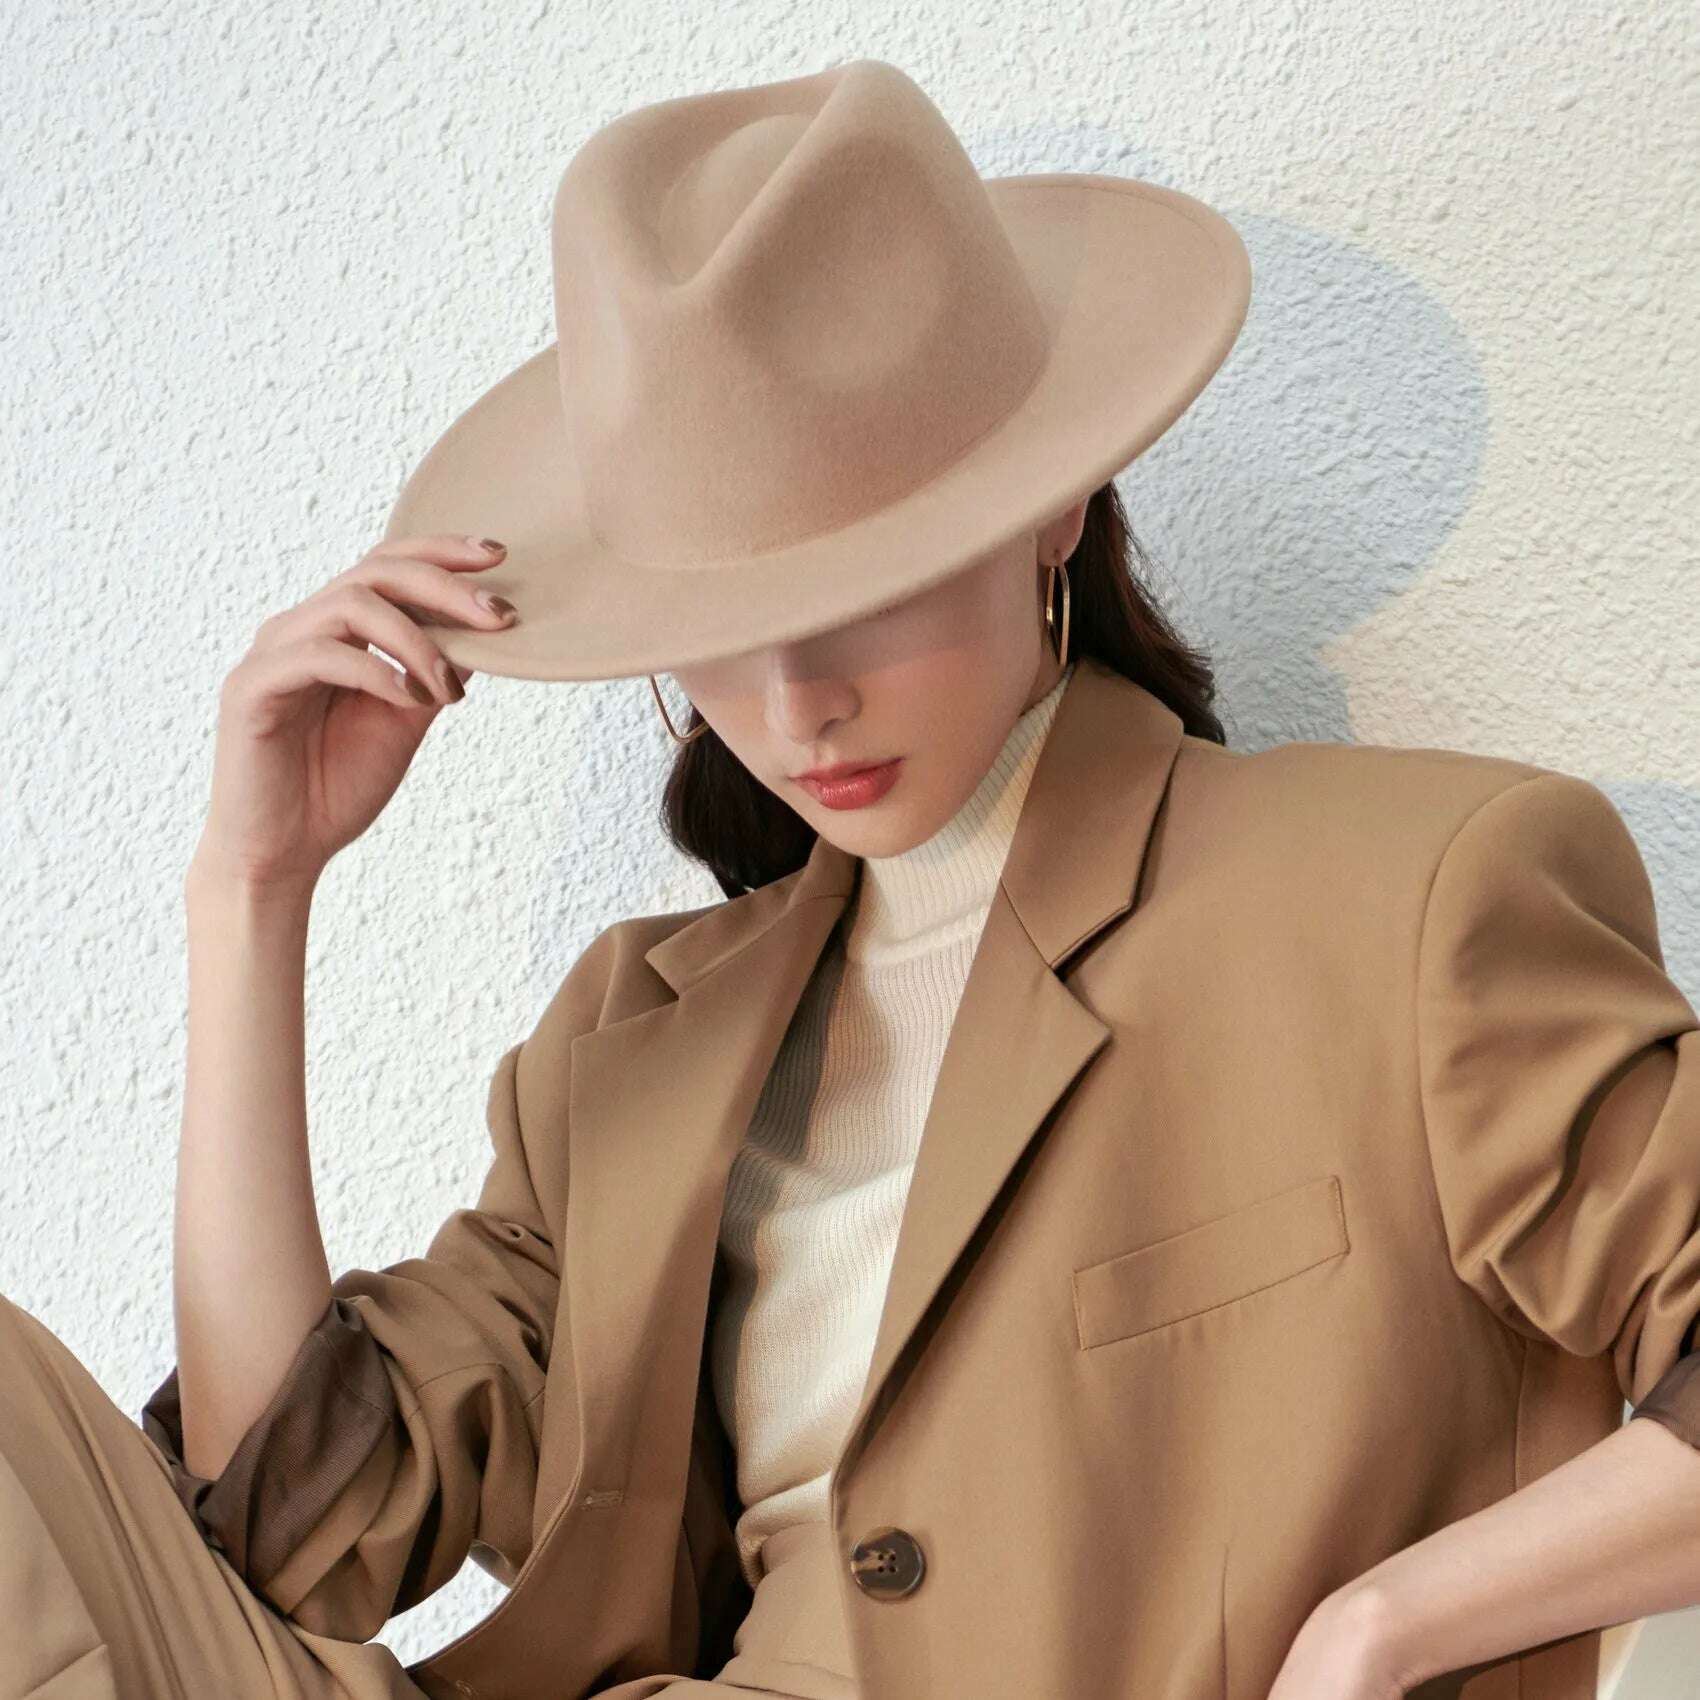 KIMLUD, New Fall Winter Flat Woollen Top Hat Unisex Wide Brimmed Hat Fashion Classic Diverse Styles Adjustable Hat Circumference Big Hat, Camel without Ribbon / M 54-57cm / China, KIMLUD Womens Clothes